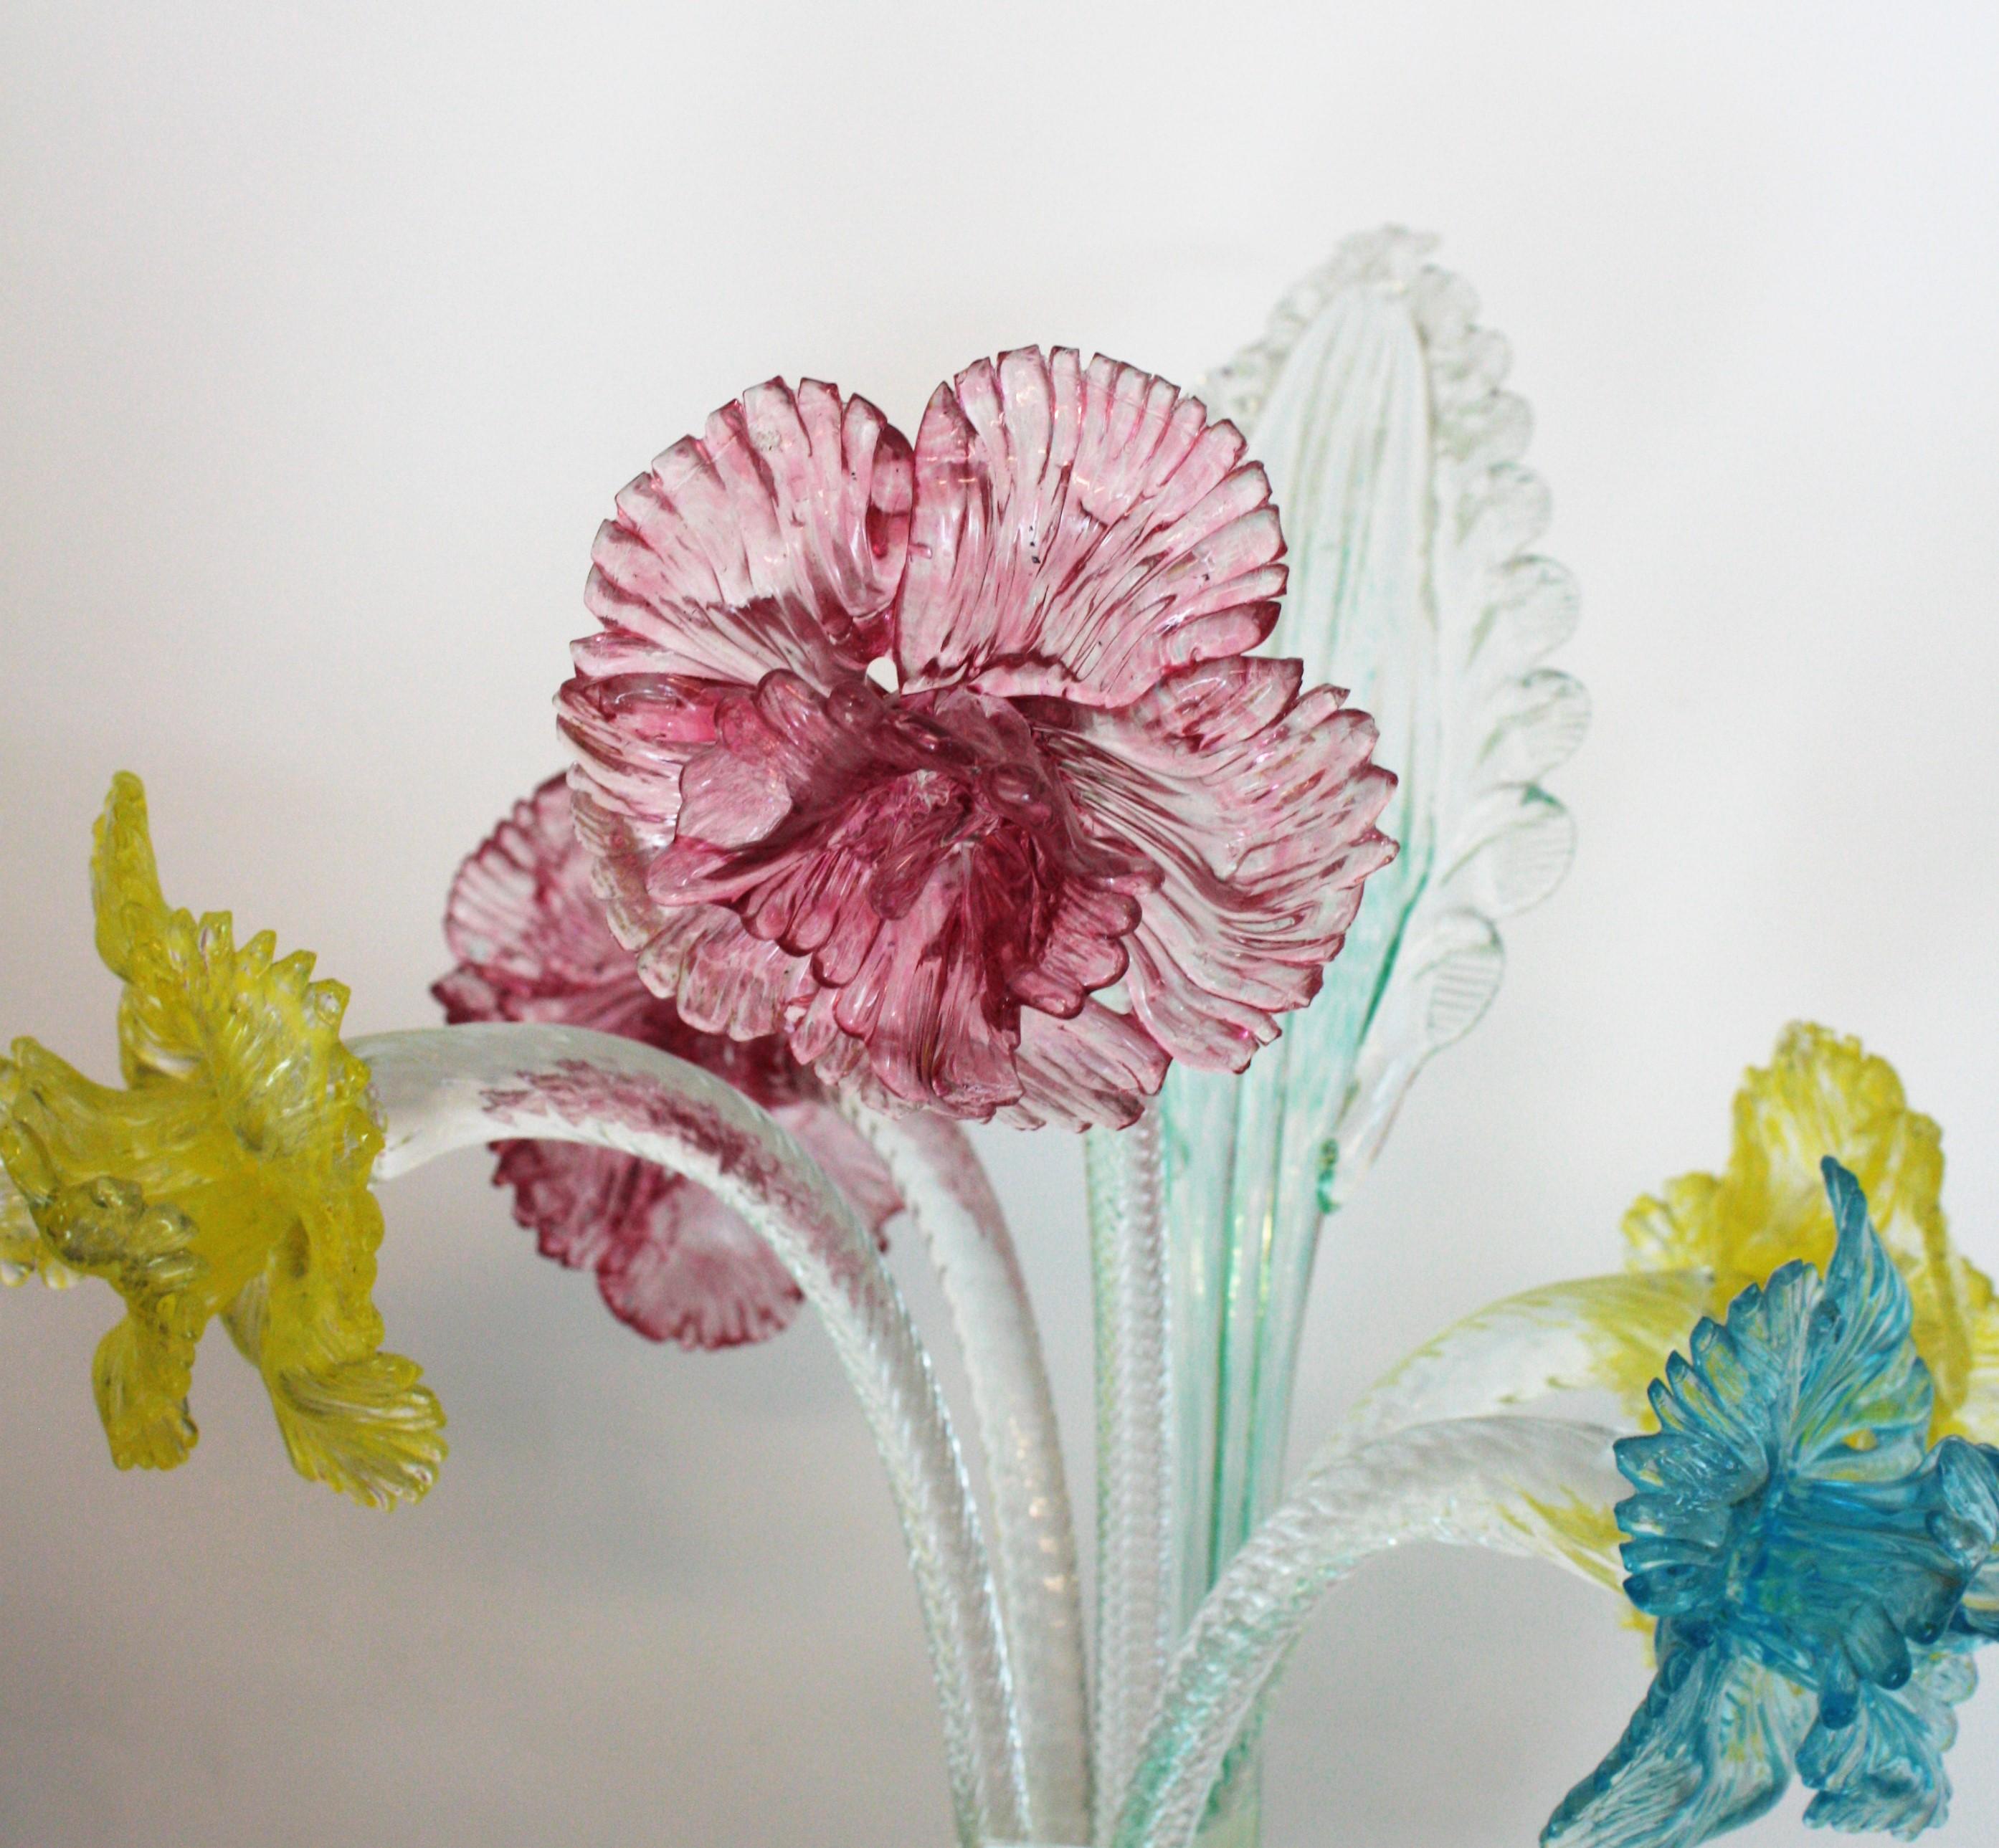 Italian Murano Art Glass Bouquet of Flowers with Long Stems, Early 20th Century